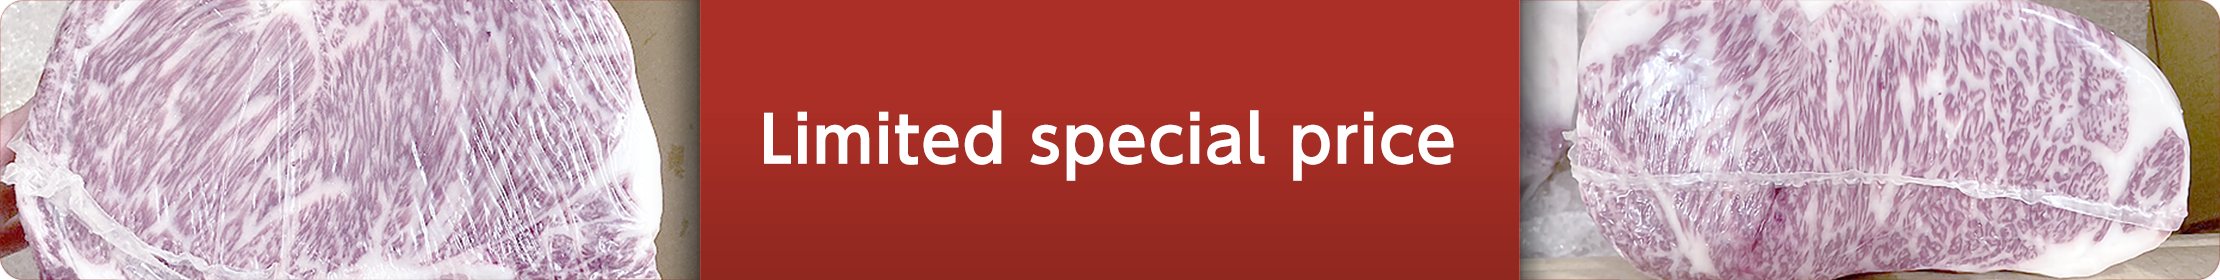 Limited special price